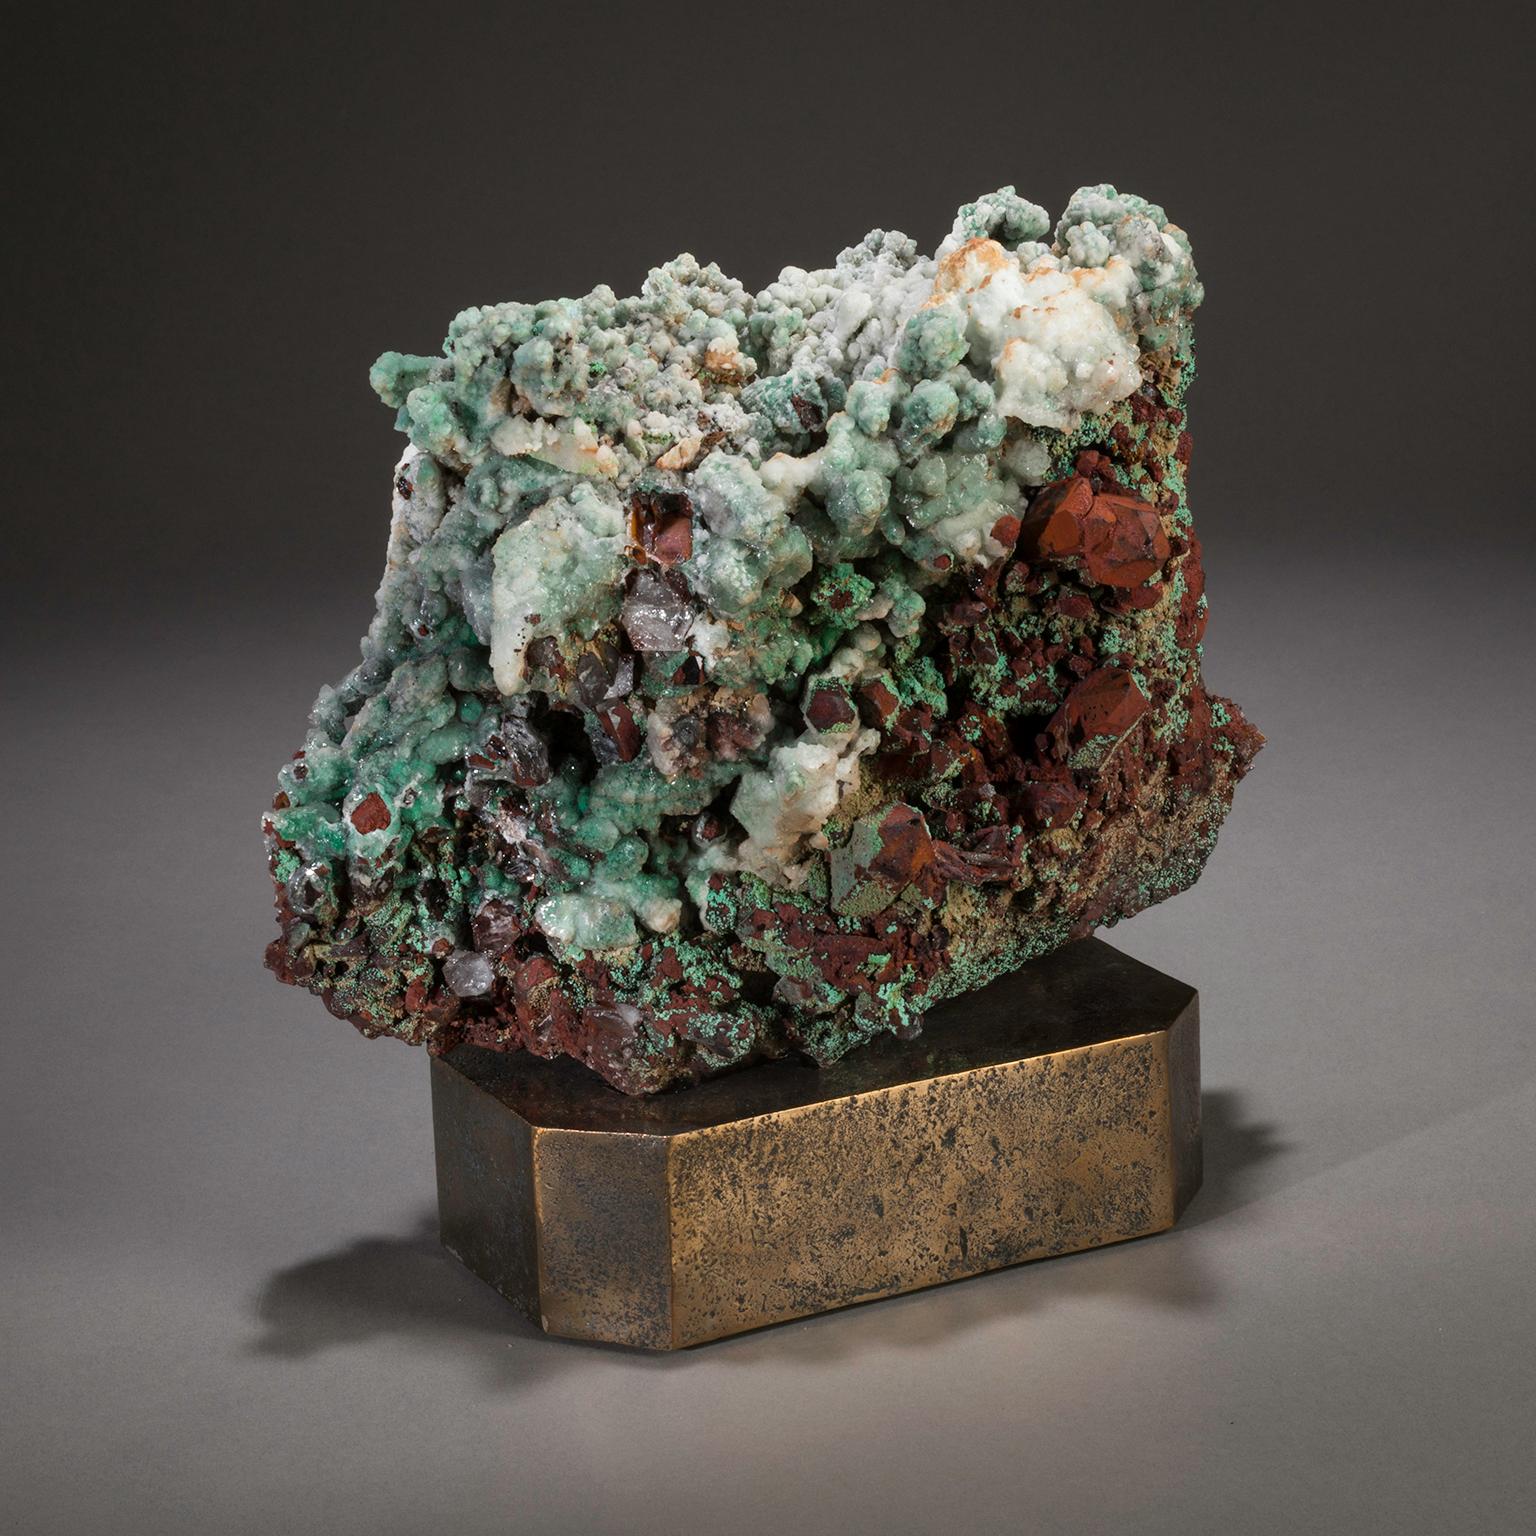 MOROCCAN QUARTZ ON BRONZE BASE

Some of the best minerals in the world are found in the North African Kingdom of Morocco. Geographically diverse, Morocco sits between the North Atlantic Ocean and the Mediterranean Sea and is known for both its